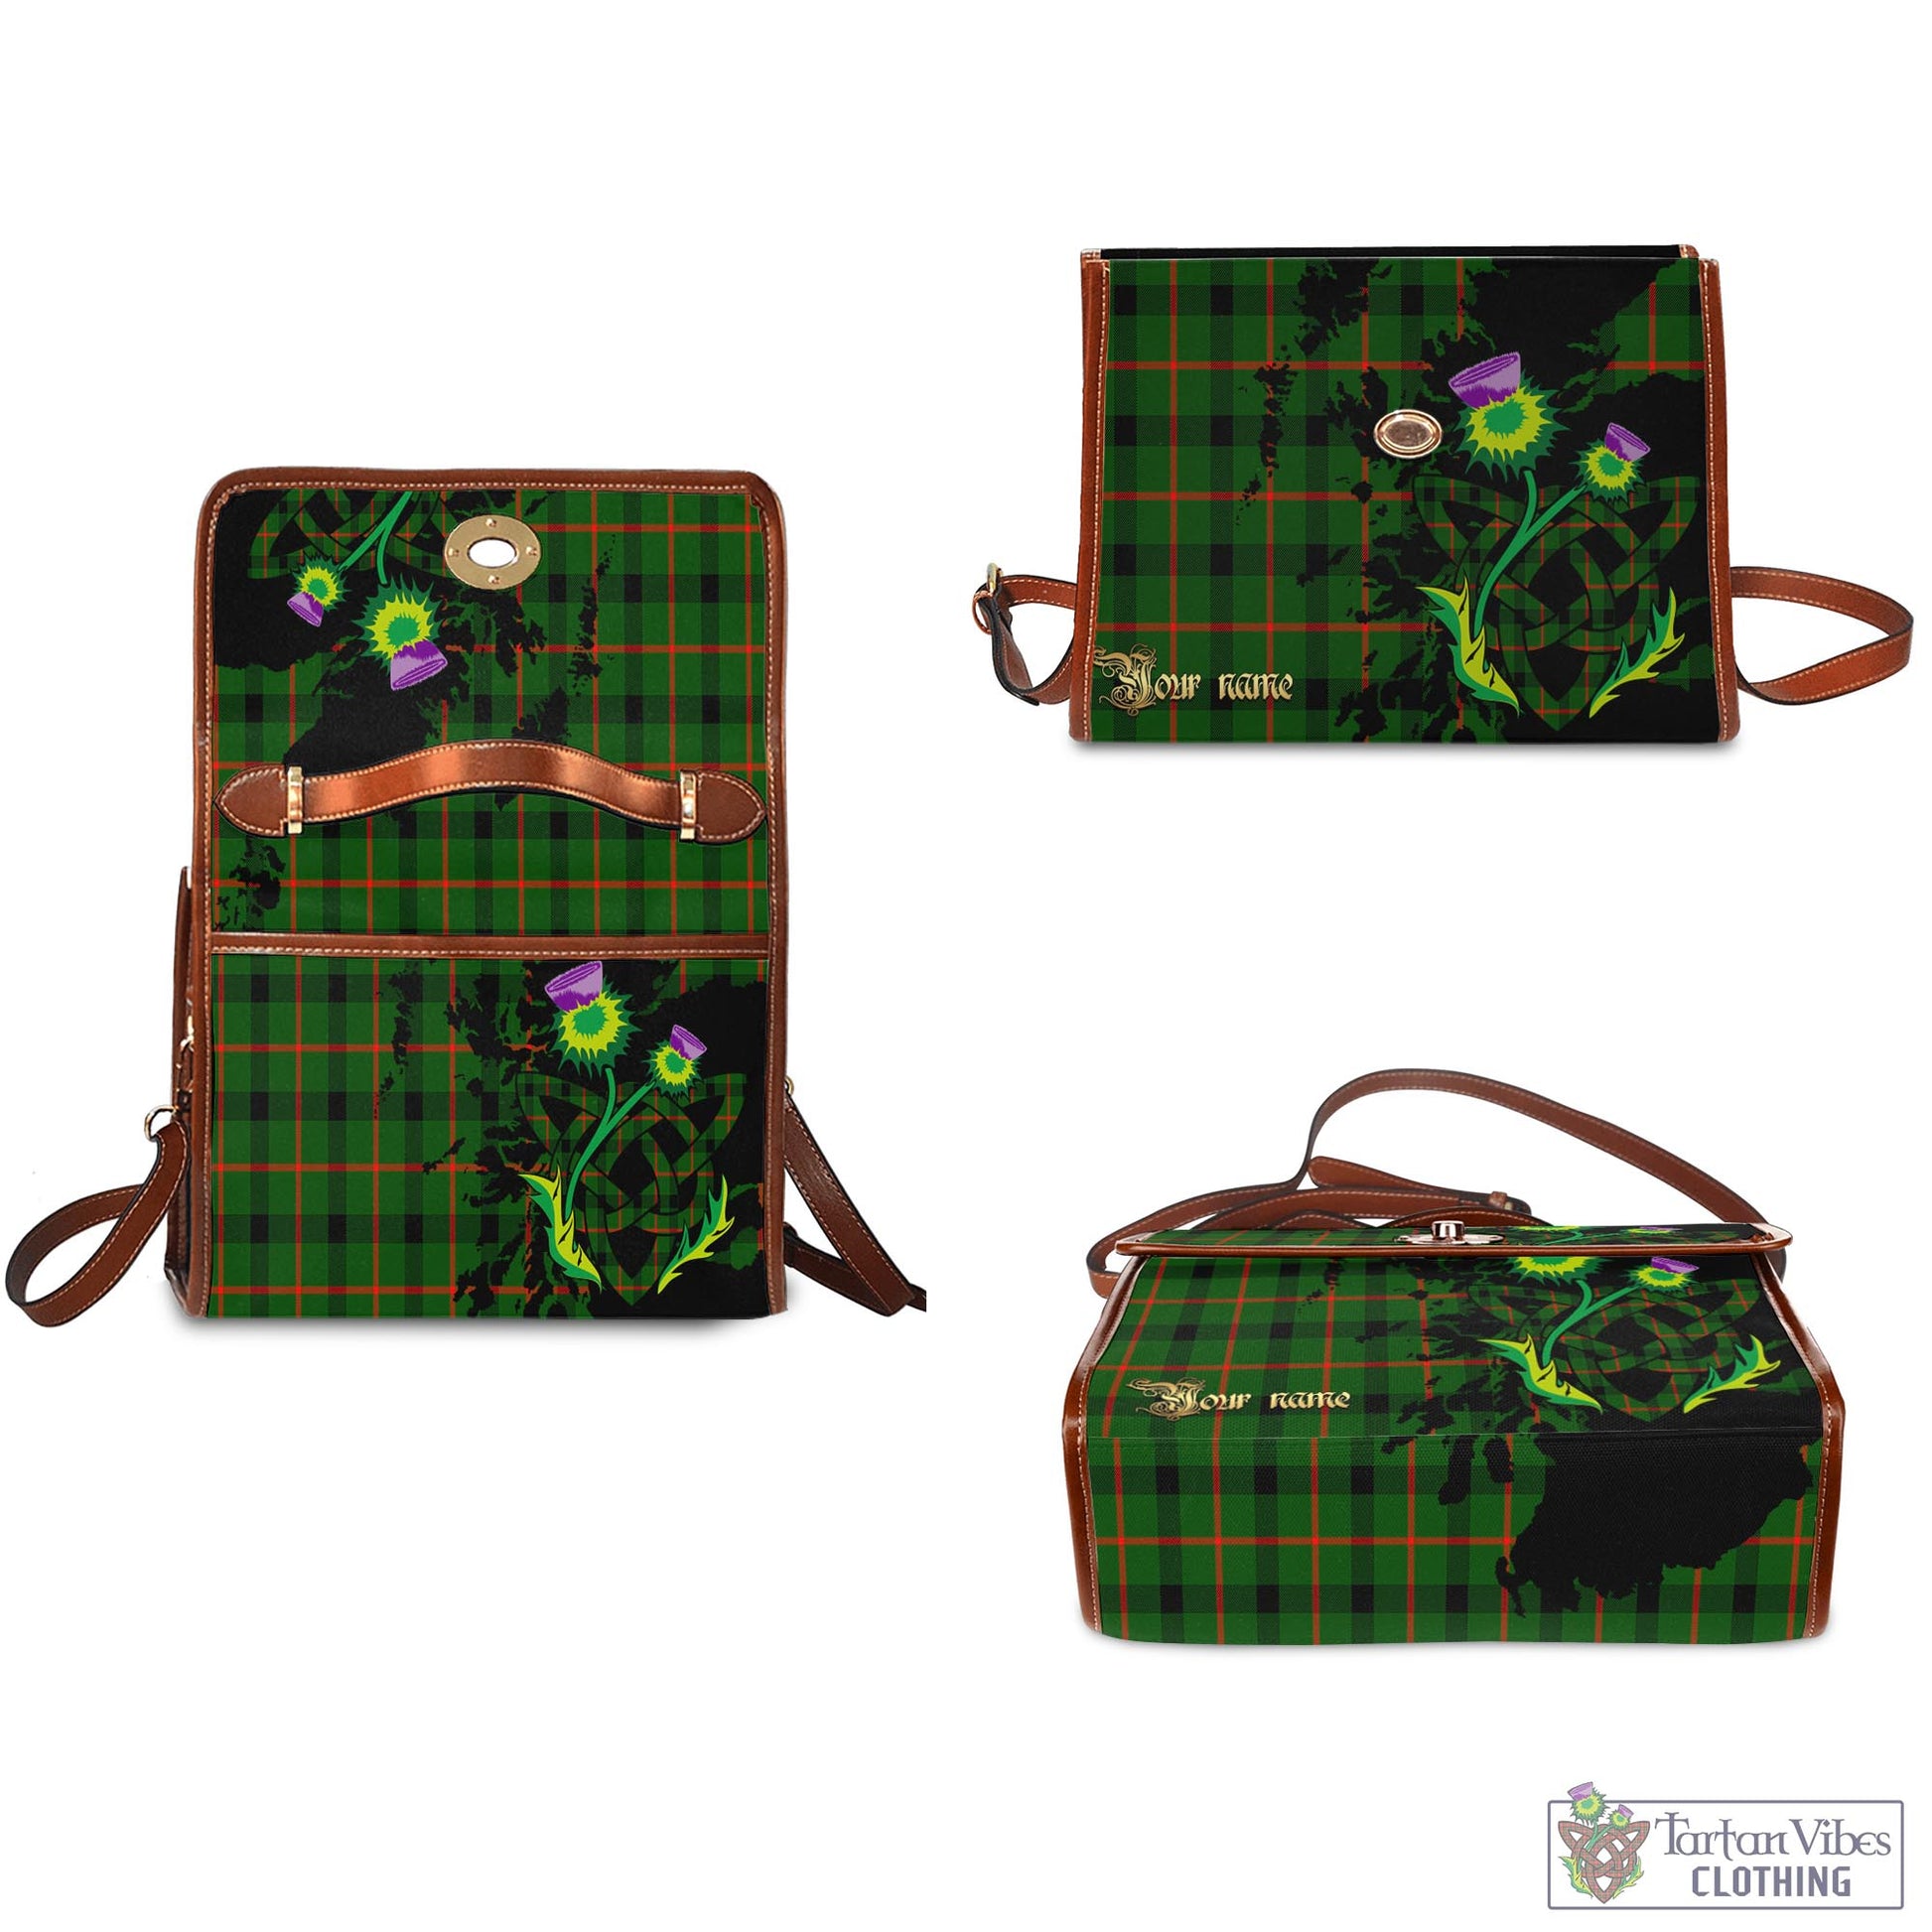 Tartan Vibes Clothing Kincaid Modern Tartan Waterproof Canvas Bag with Scotland Map and Thistle Celtic Accents